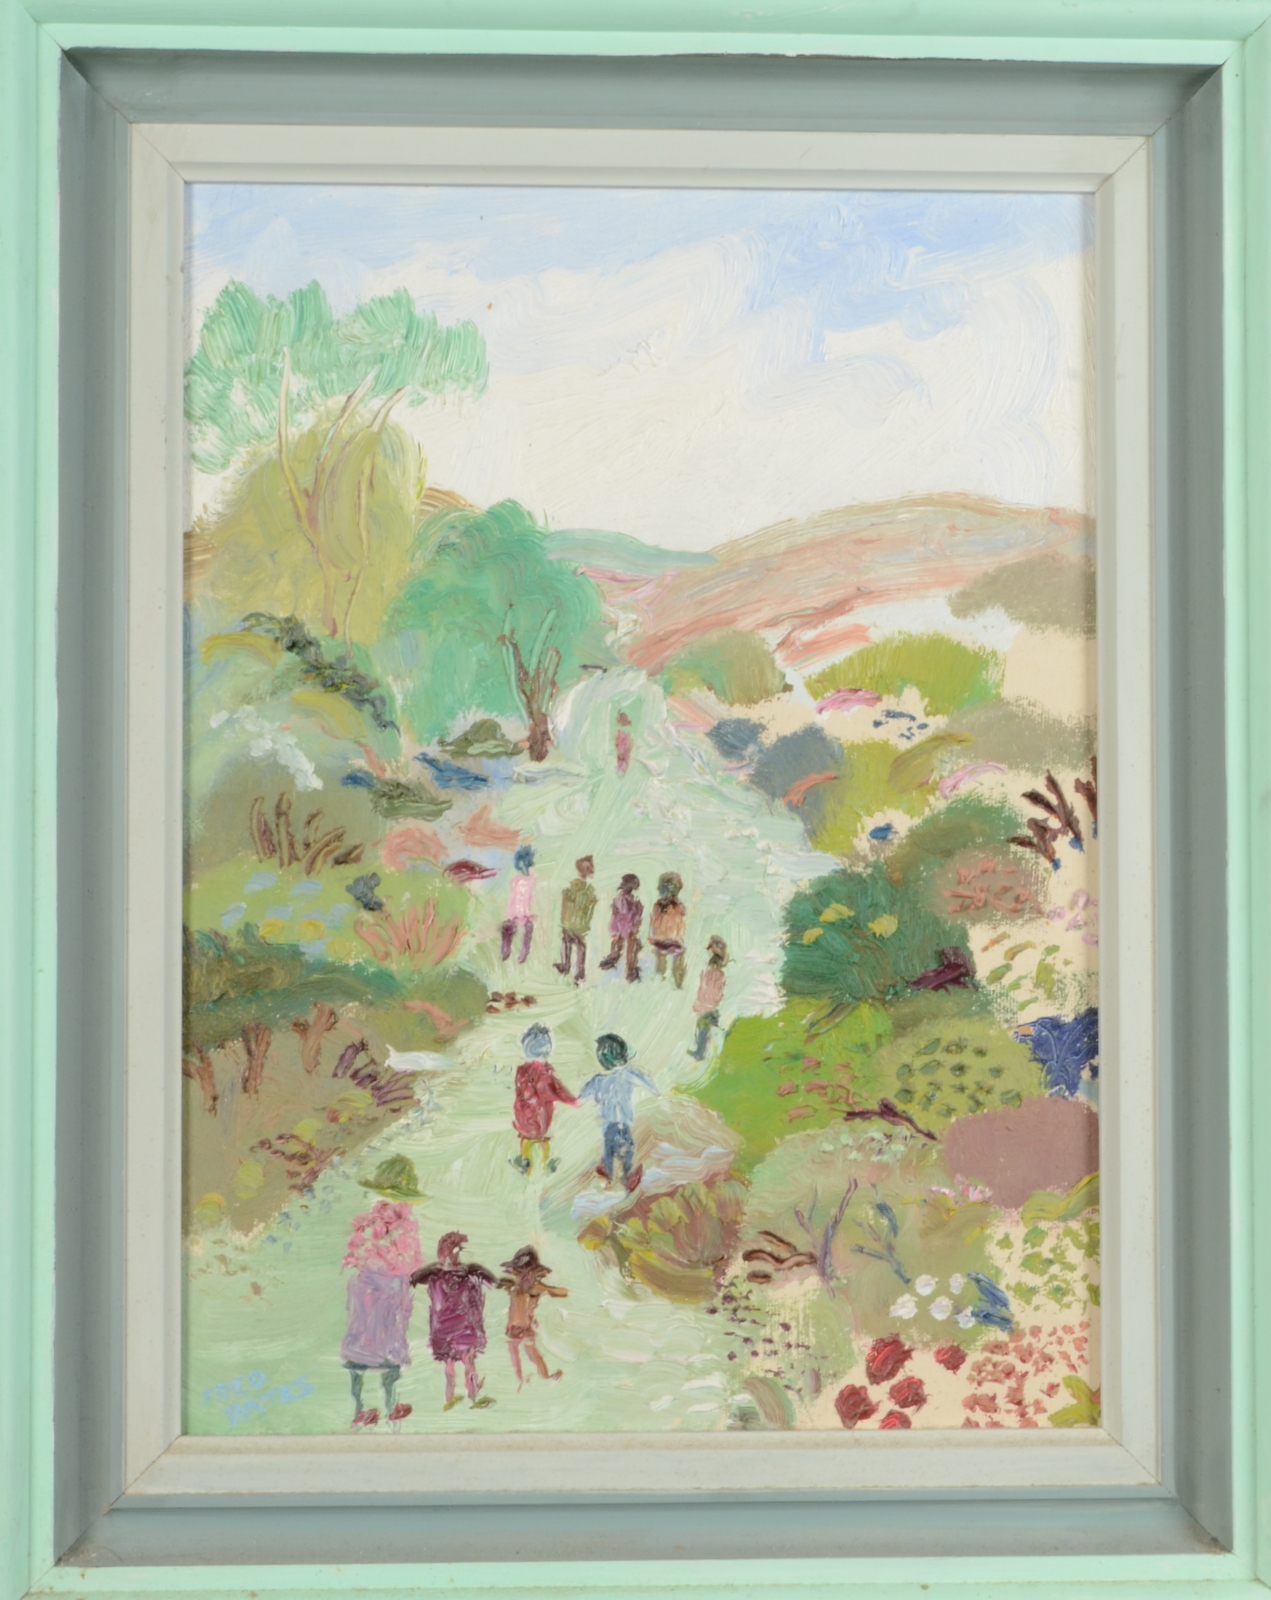 FRED YATES The Walk Oil on board Signed 40 x 30cm Provenance - The Heather Bray Collection - Image 2 of 2